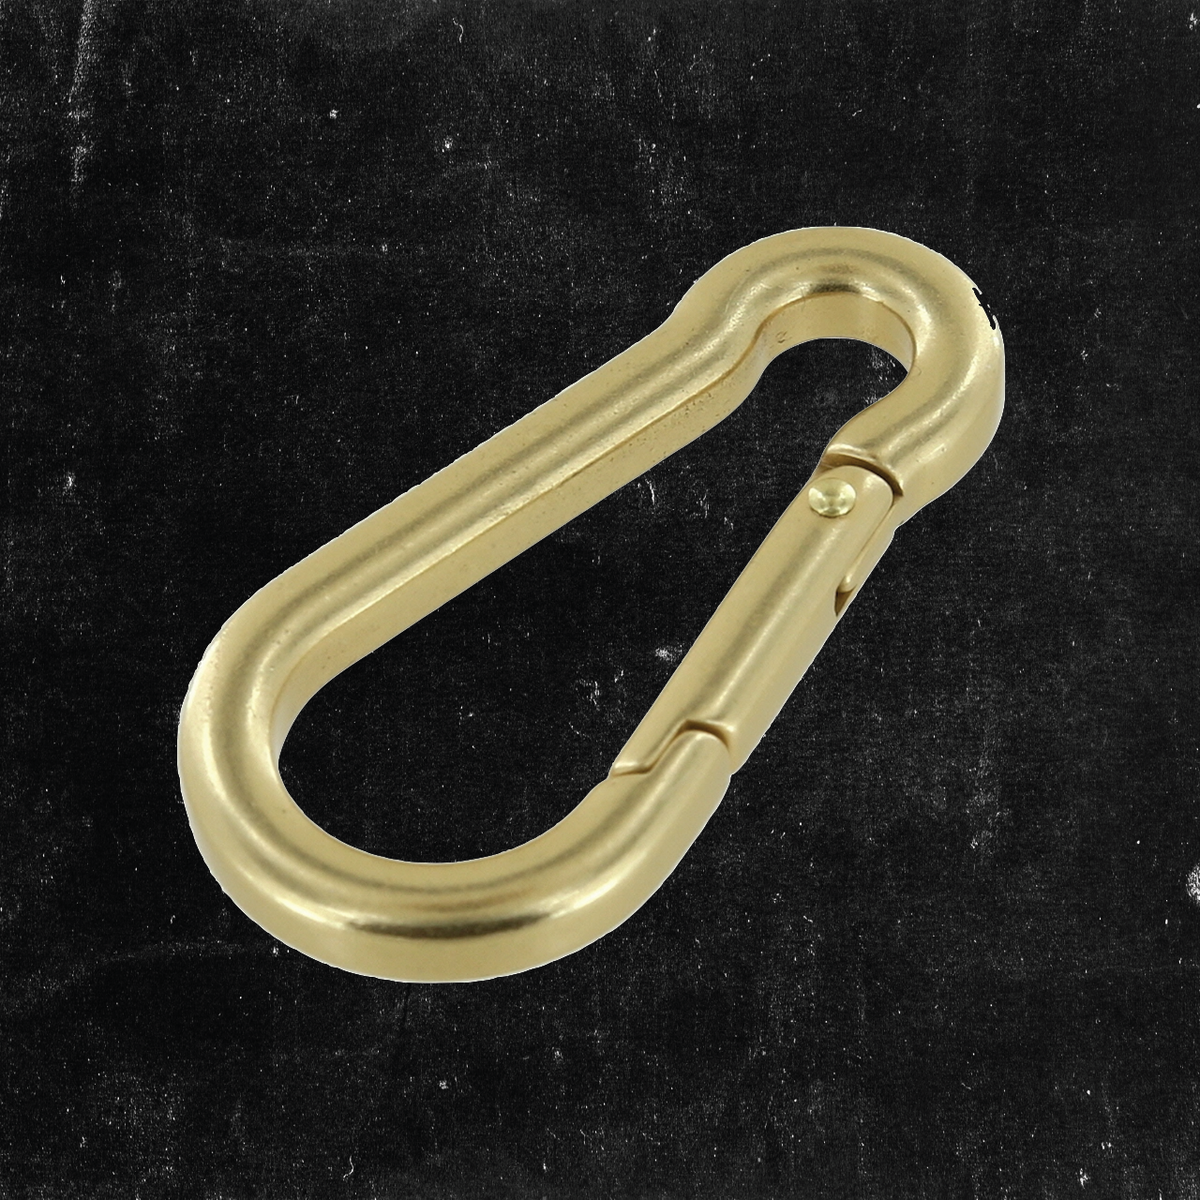 Fashionable brass carabiner from Leading Suppliers 